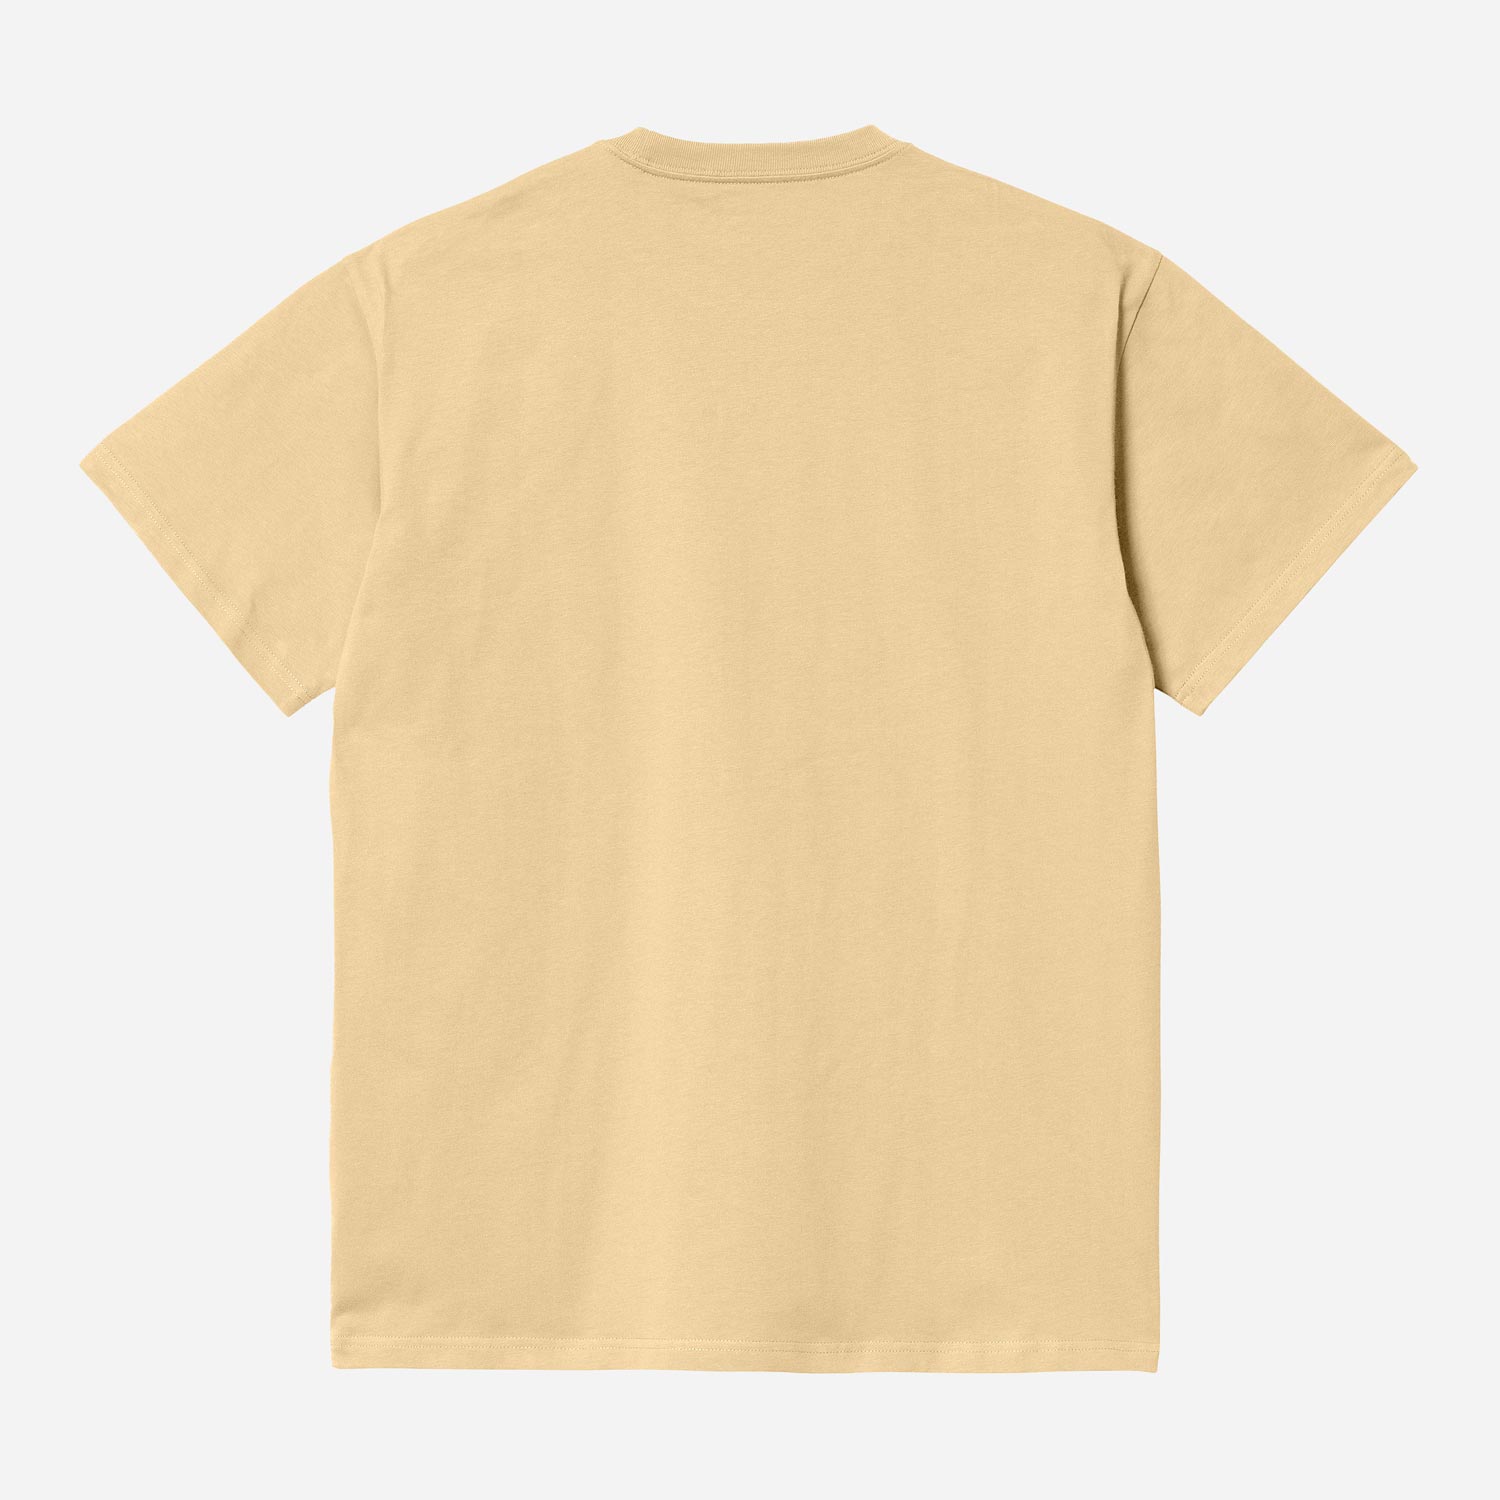 Carhartt WIP Chase Tee - Citron/Gold